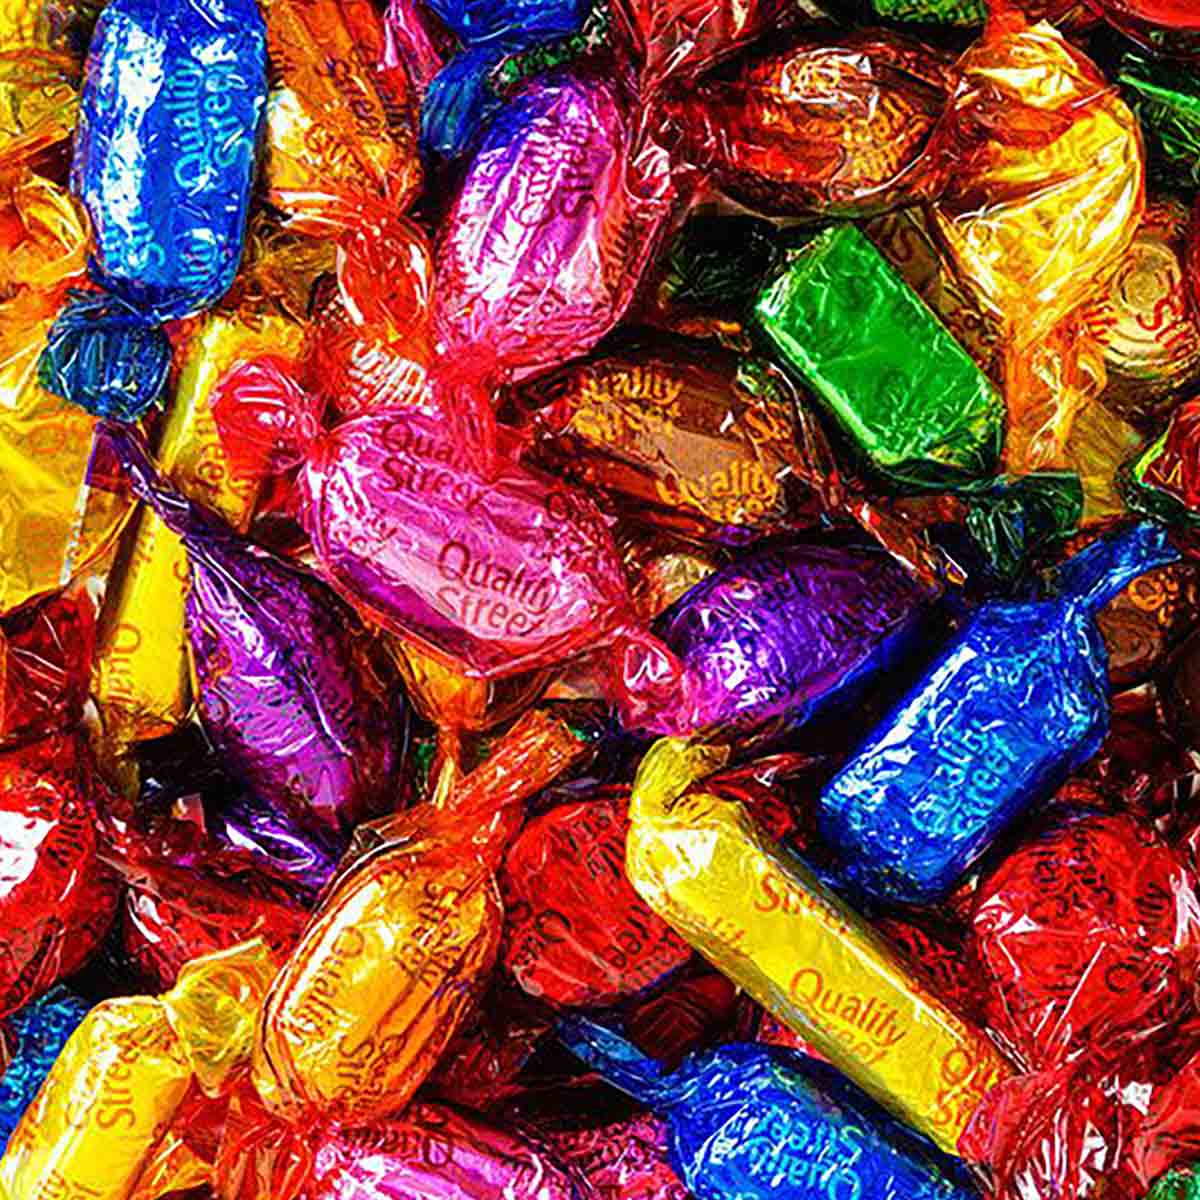 Pile Of Quality Street Sweets